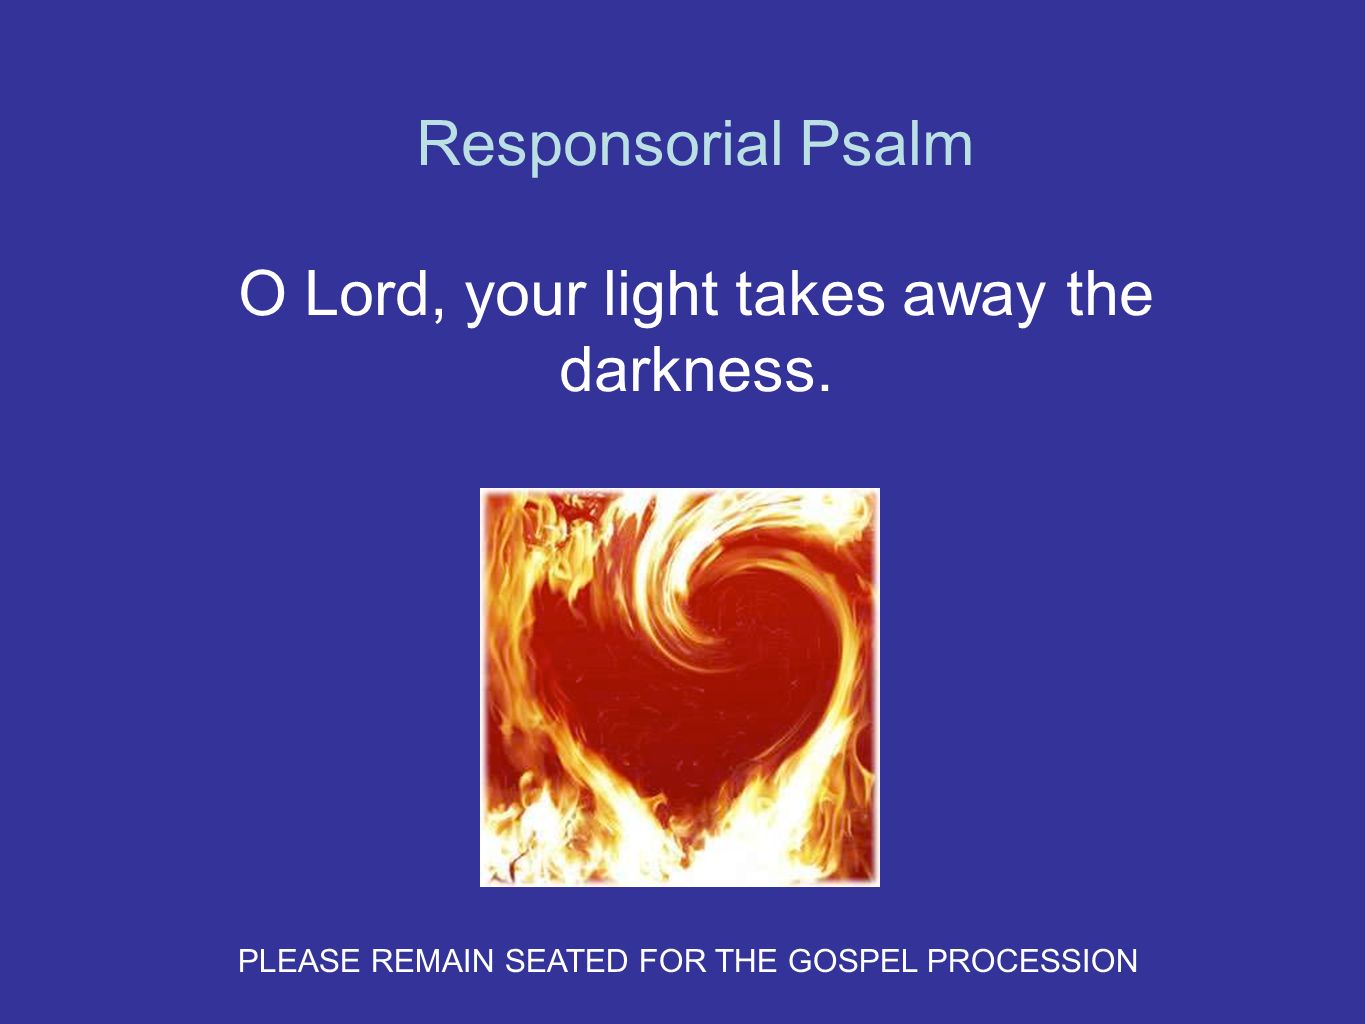 Responsorial Psalm O Lord, your light takes away the darkness.